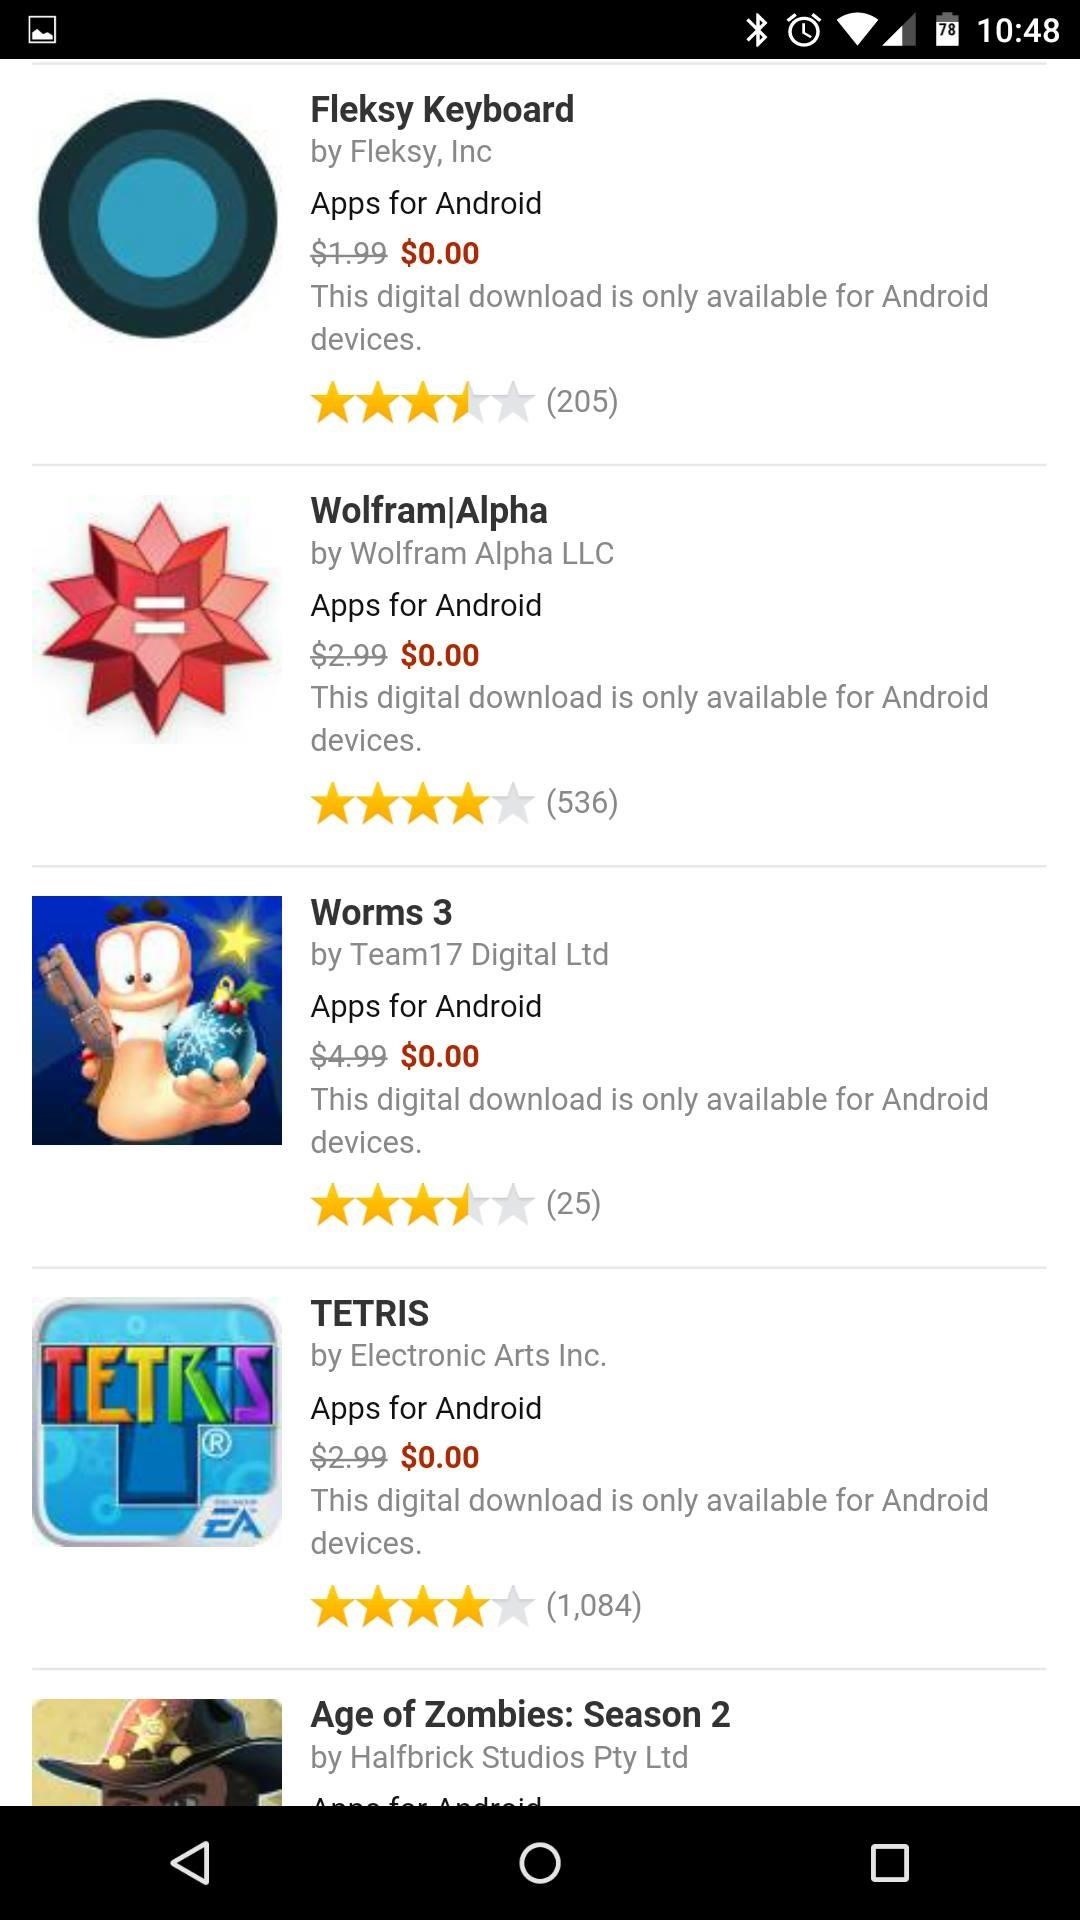 How to Get 40 Paid Android Apps for Free in the Amazon Appstore